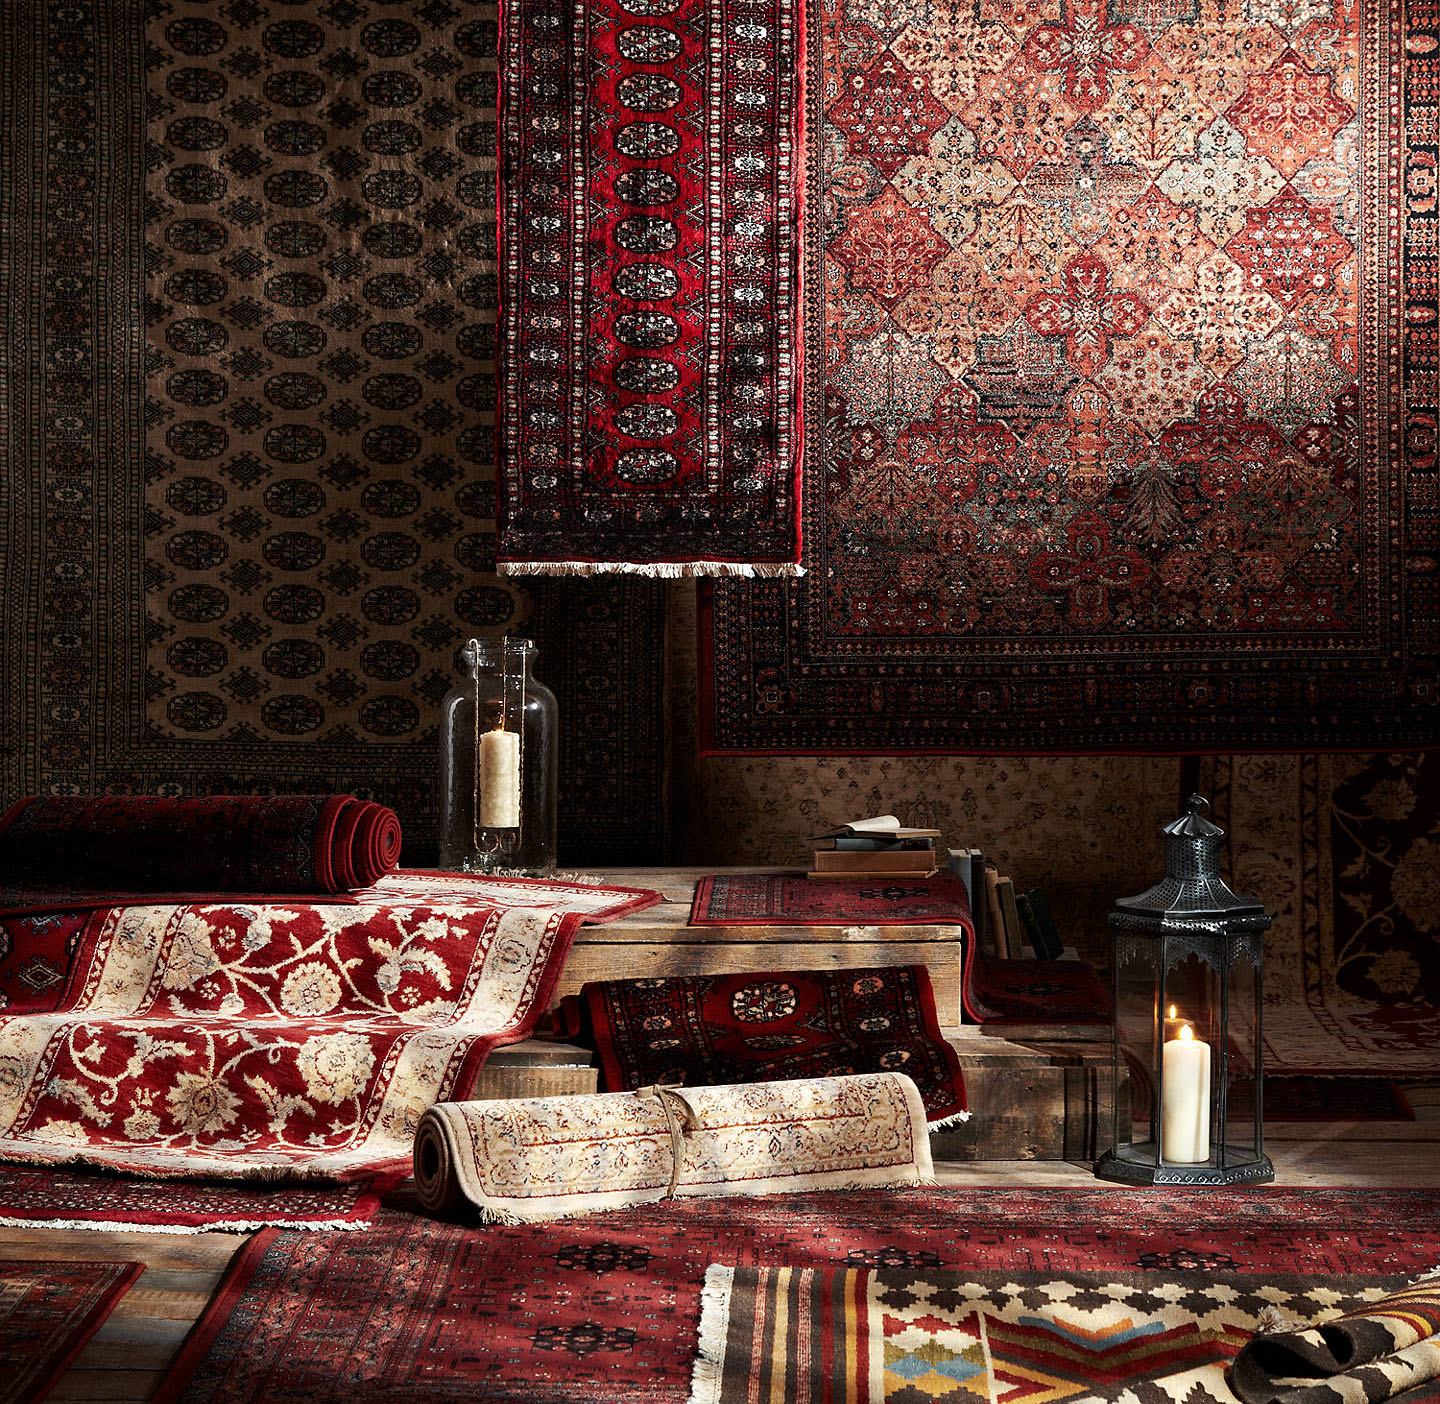 The Woven Narrative Of Bokhara Rugs And Why You Need One